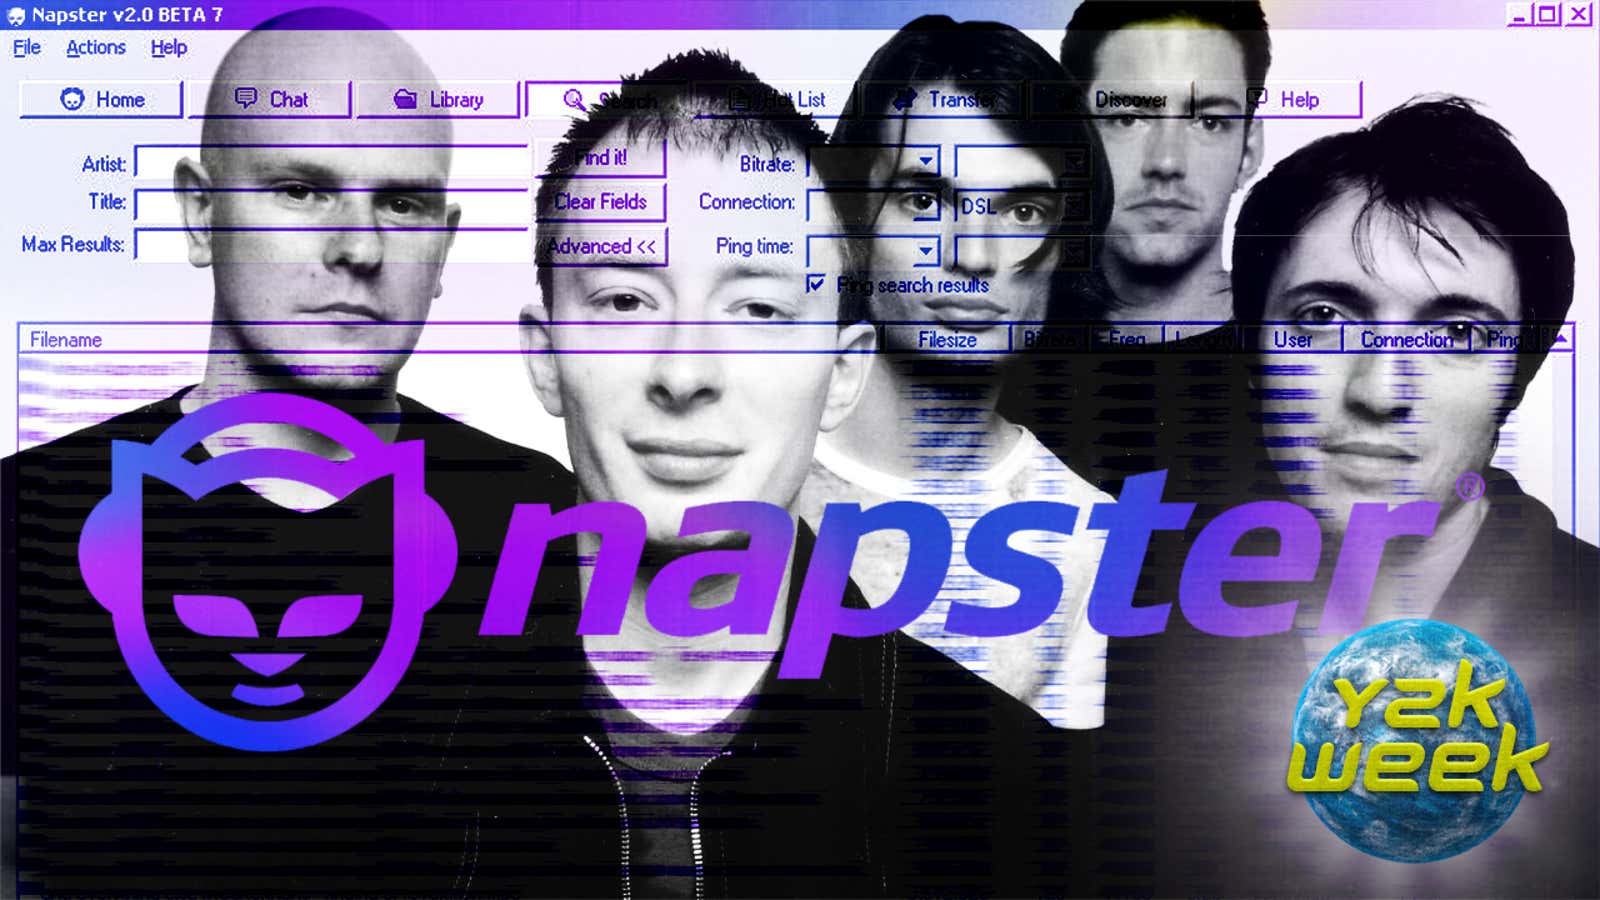 Metallica's Music Will Now Be Available On Napster